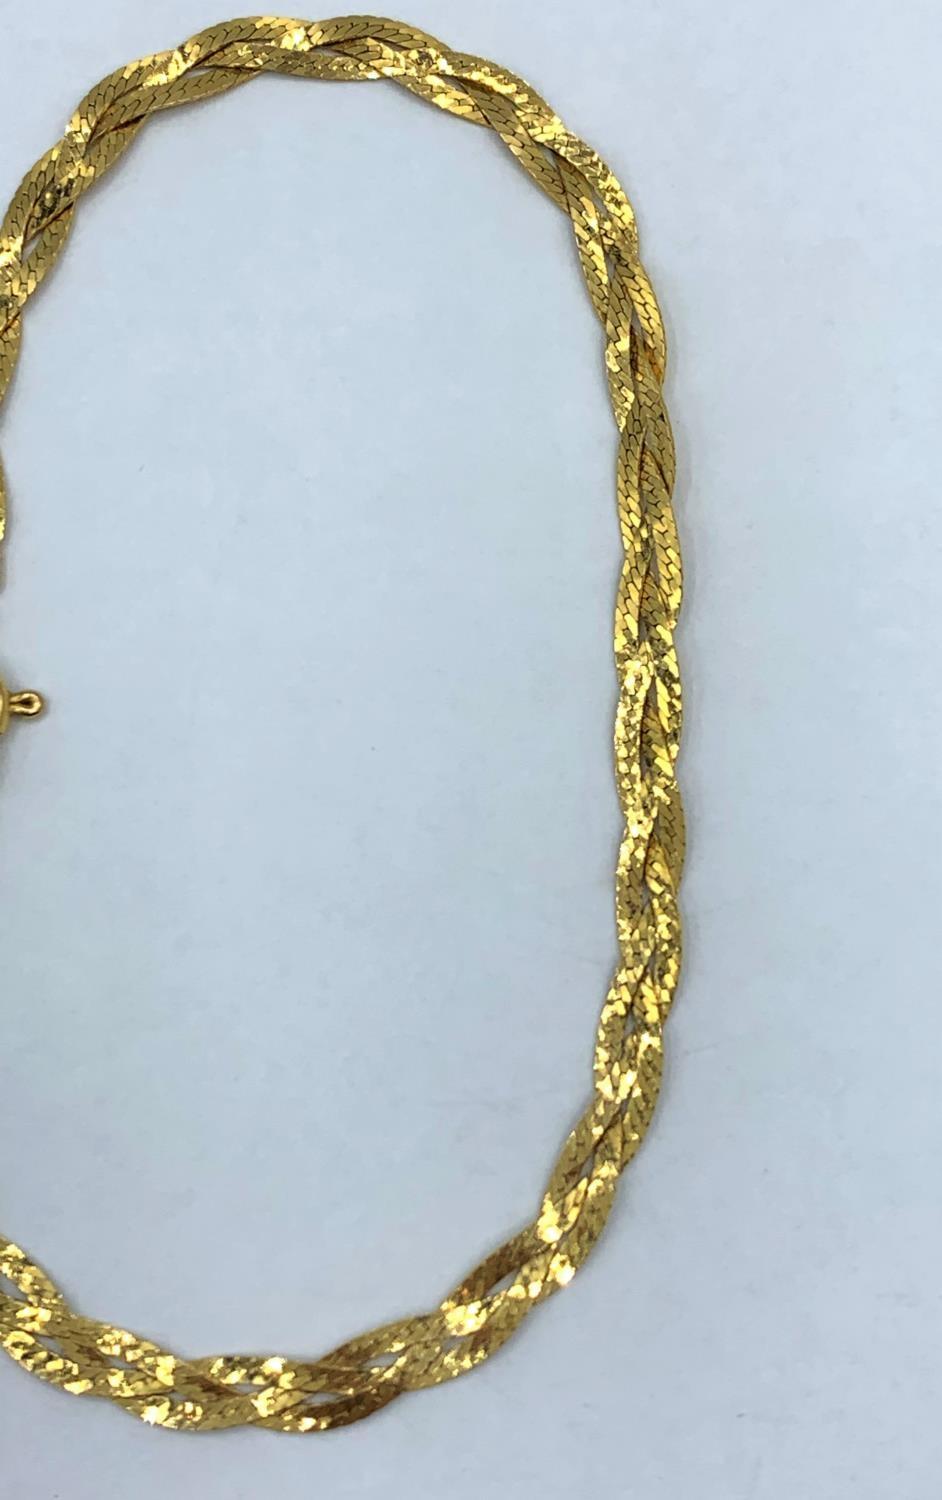 9ct yellow gold twist bracelet, weight 2.4g and 17cm long - Image 3 of 4